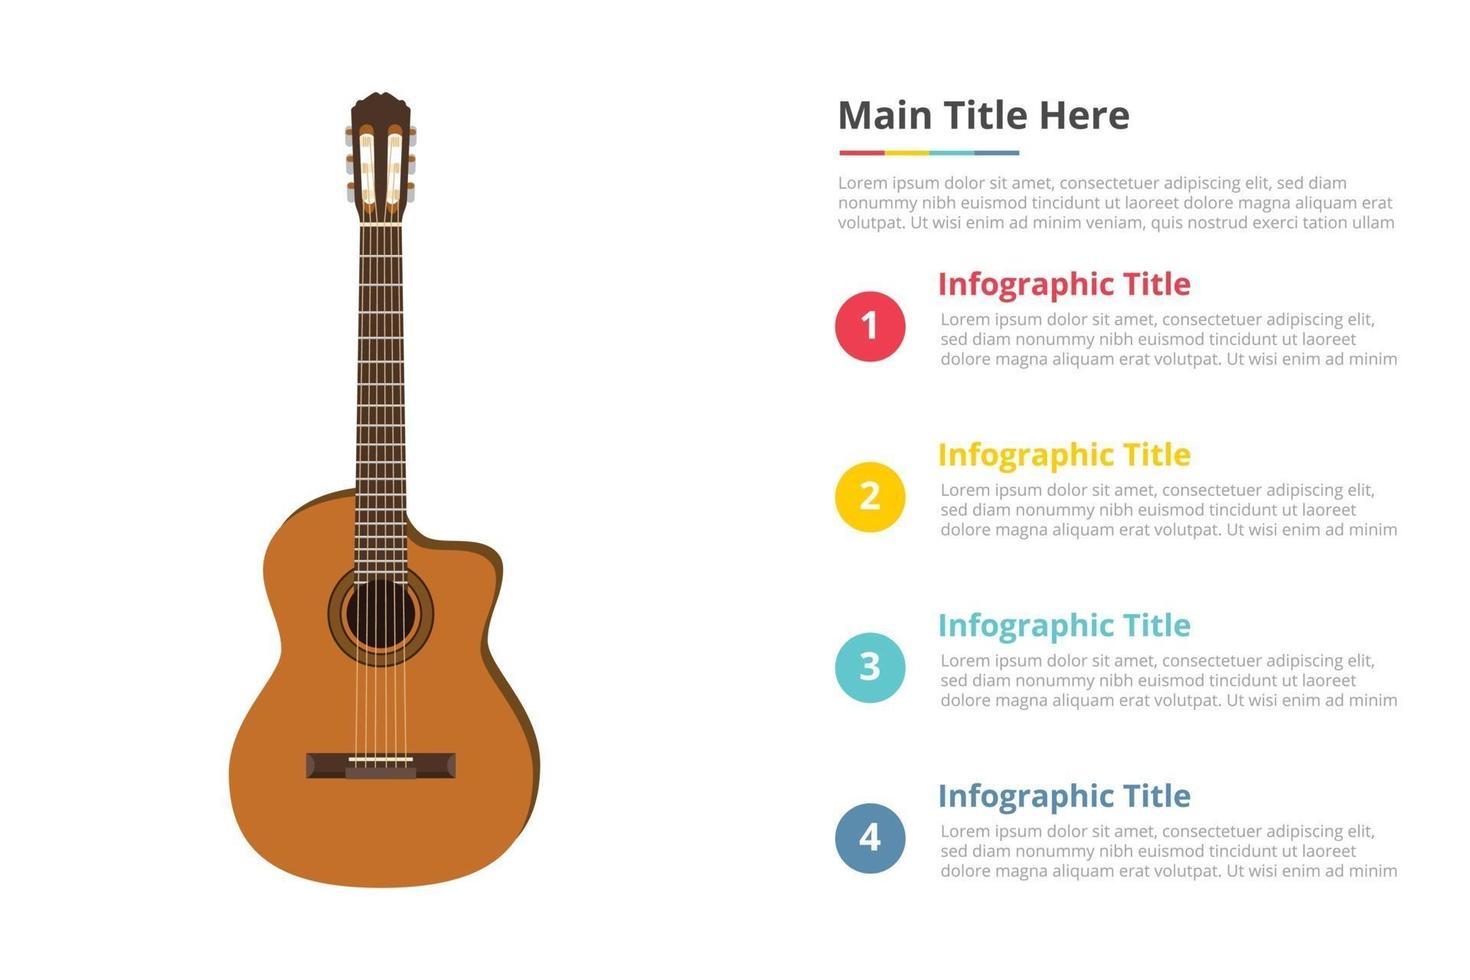 classic guitar infographic template with 4 points of free space text description - vector illustration